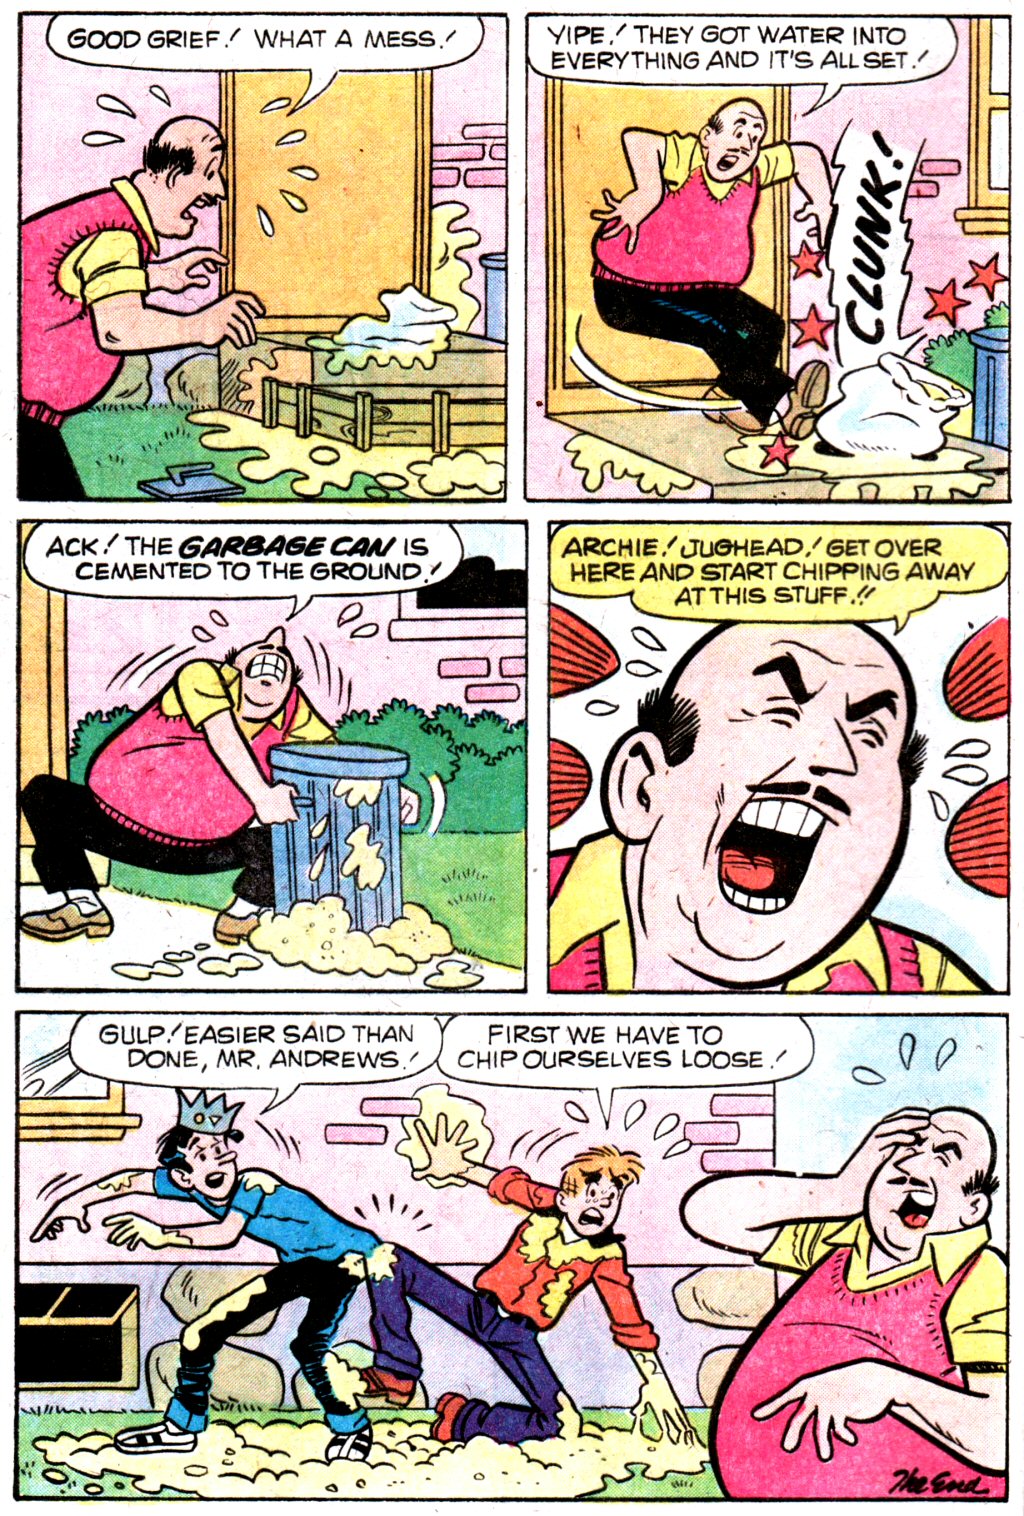 Archie (1960) 274 Page 8